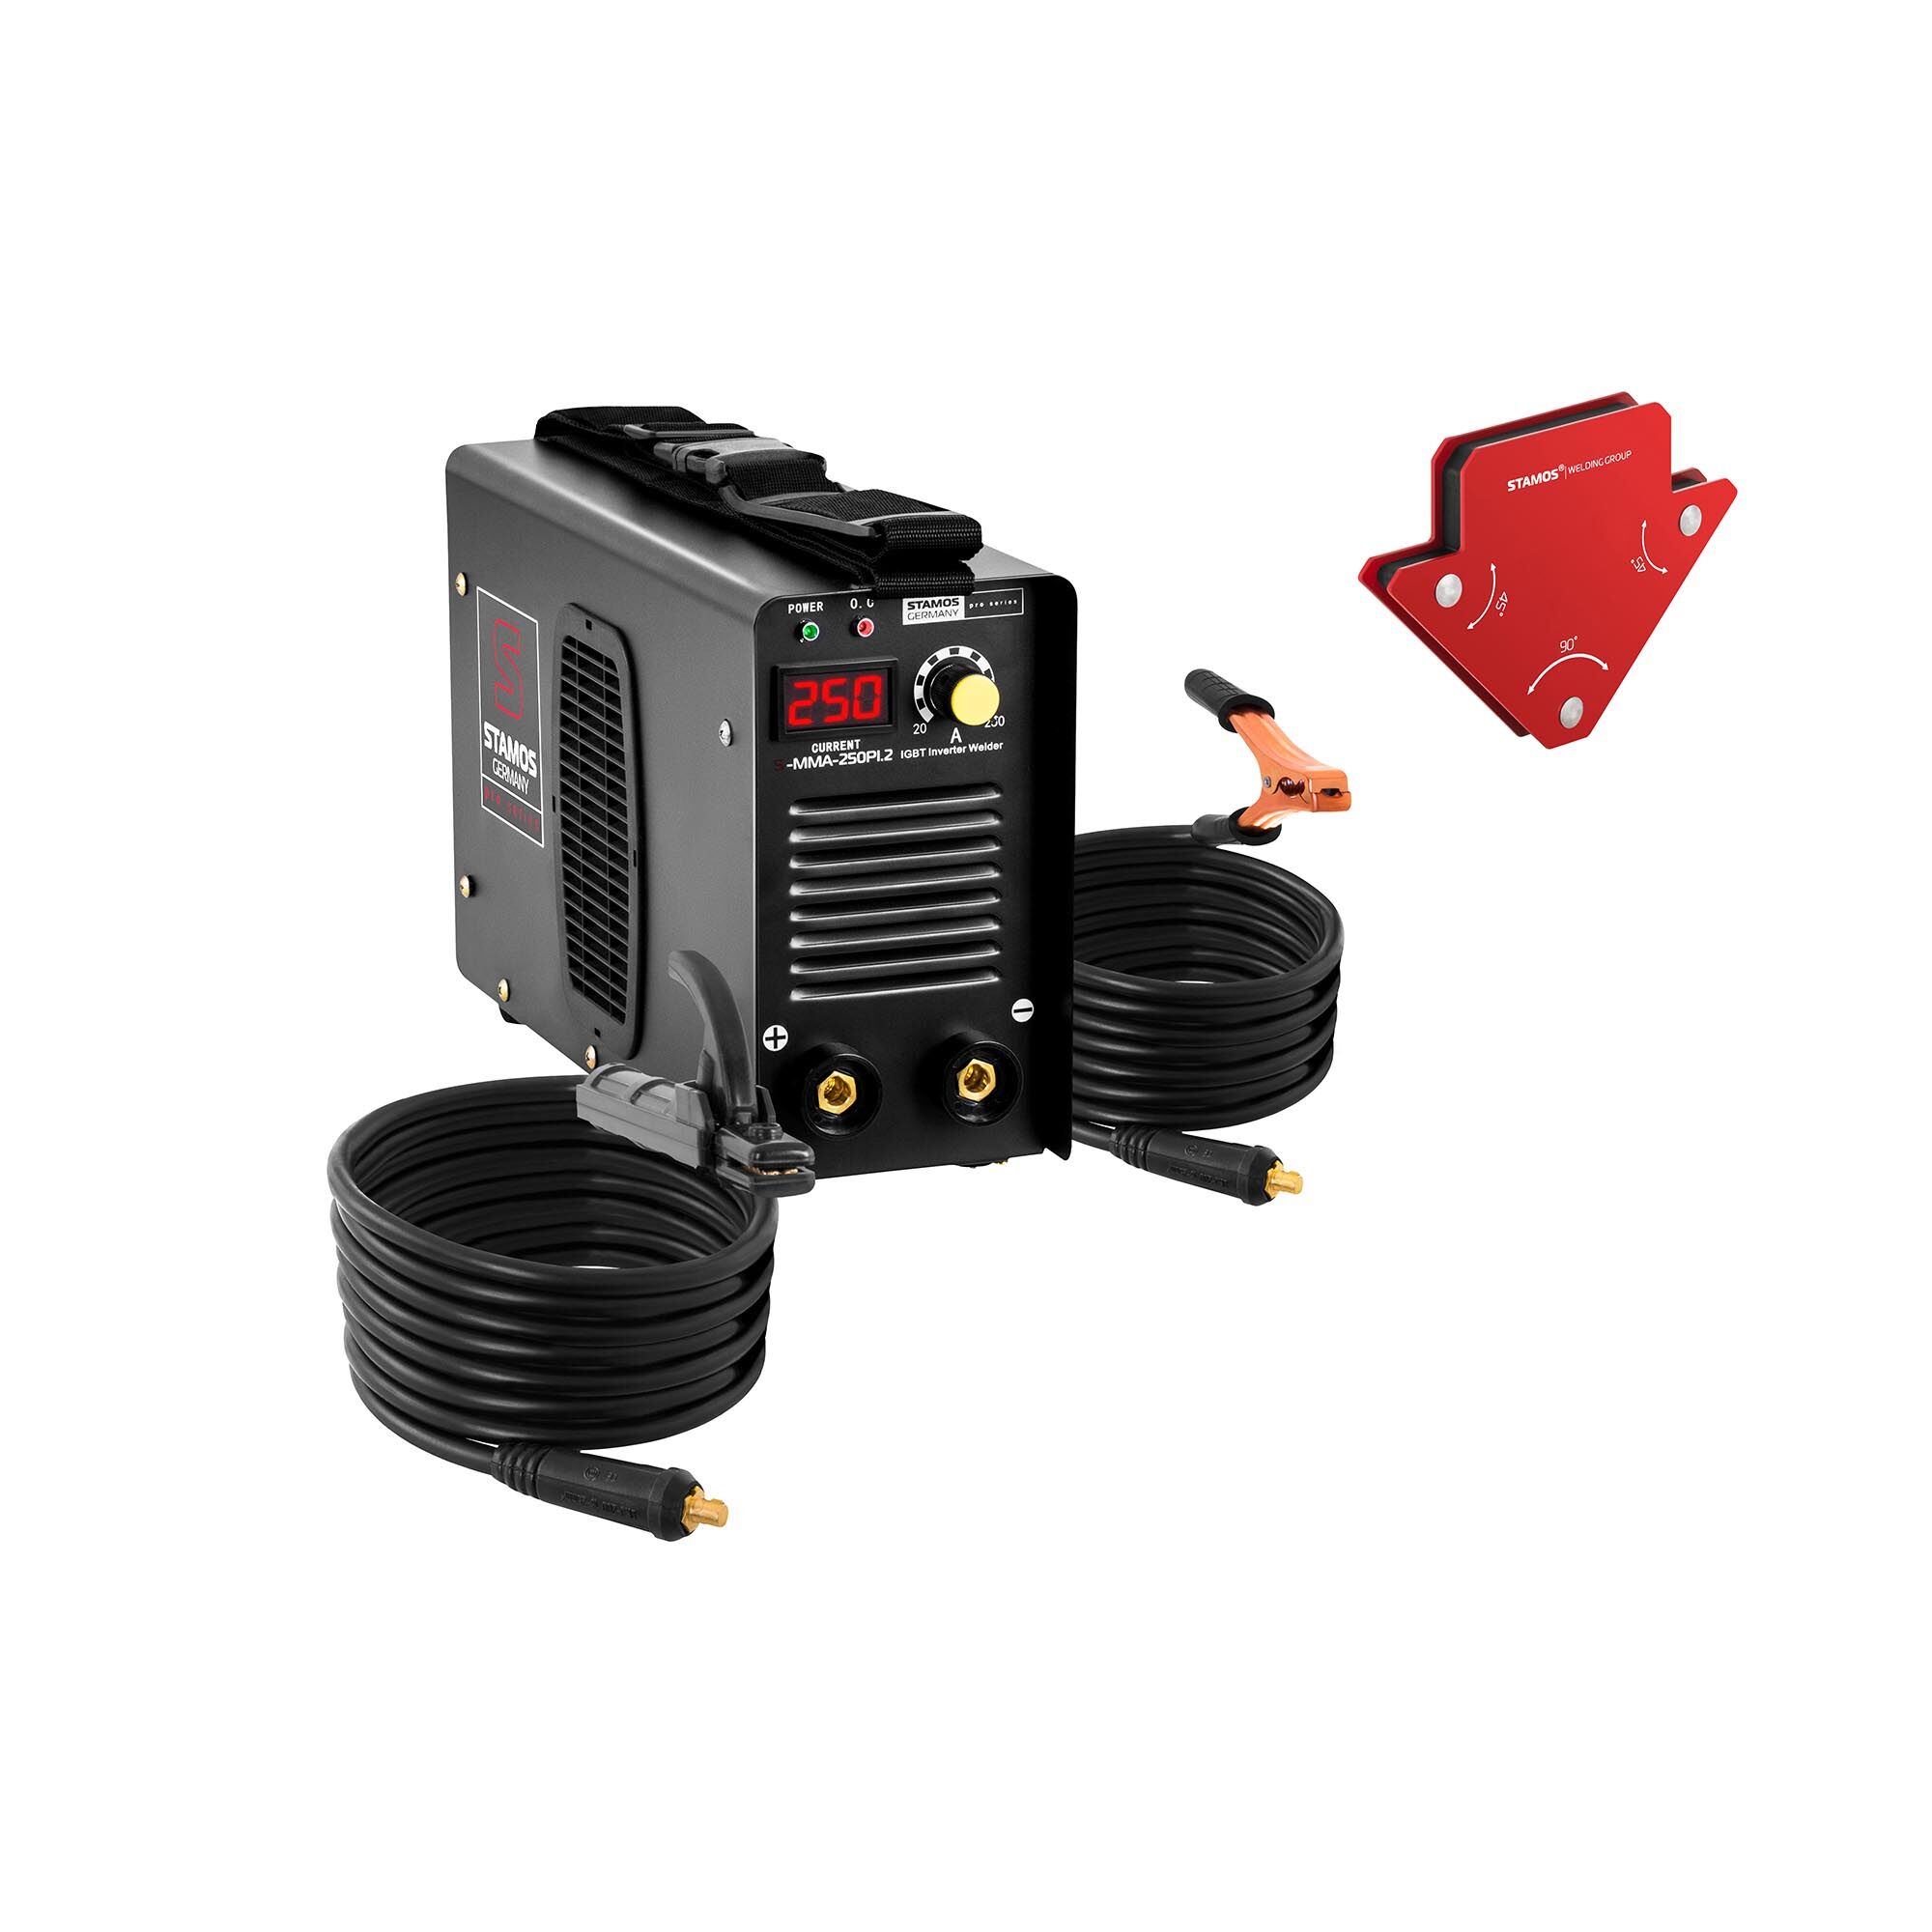 Stamos Pro Series Set: Electrode Welding Machine with 2 Magnetic Welding Holders - 250 A - 8 m cable - hot start